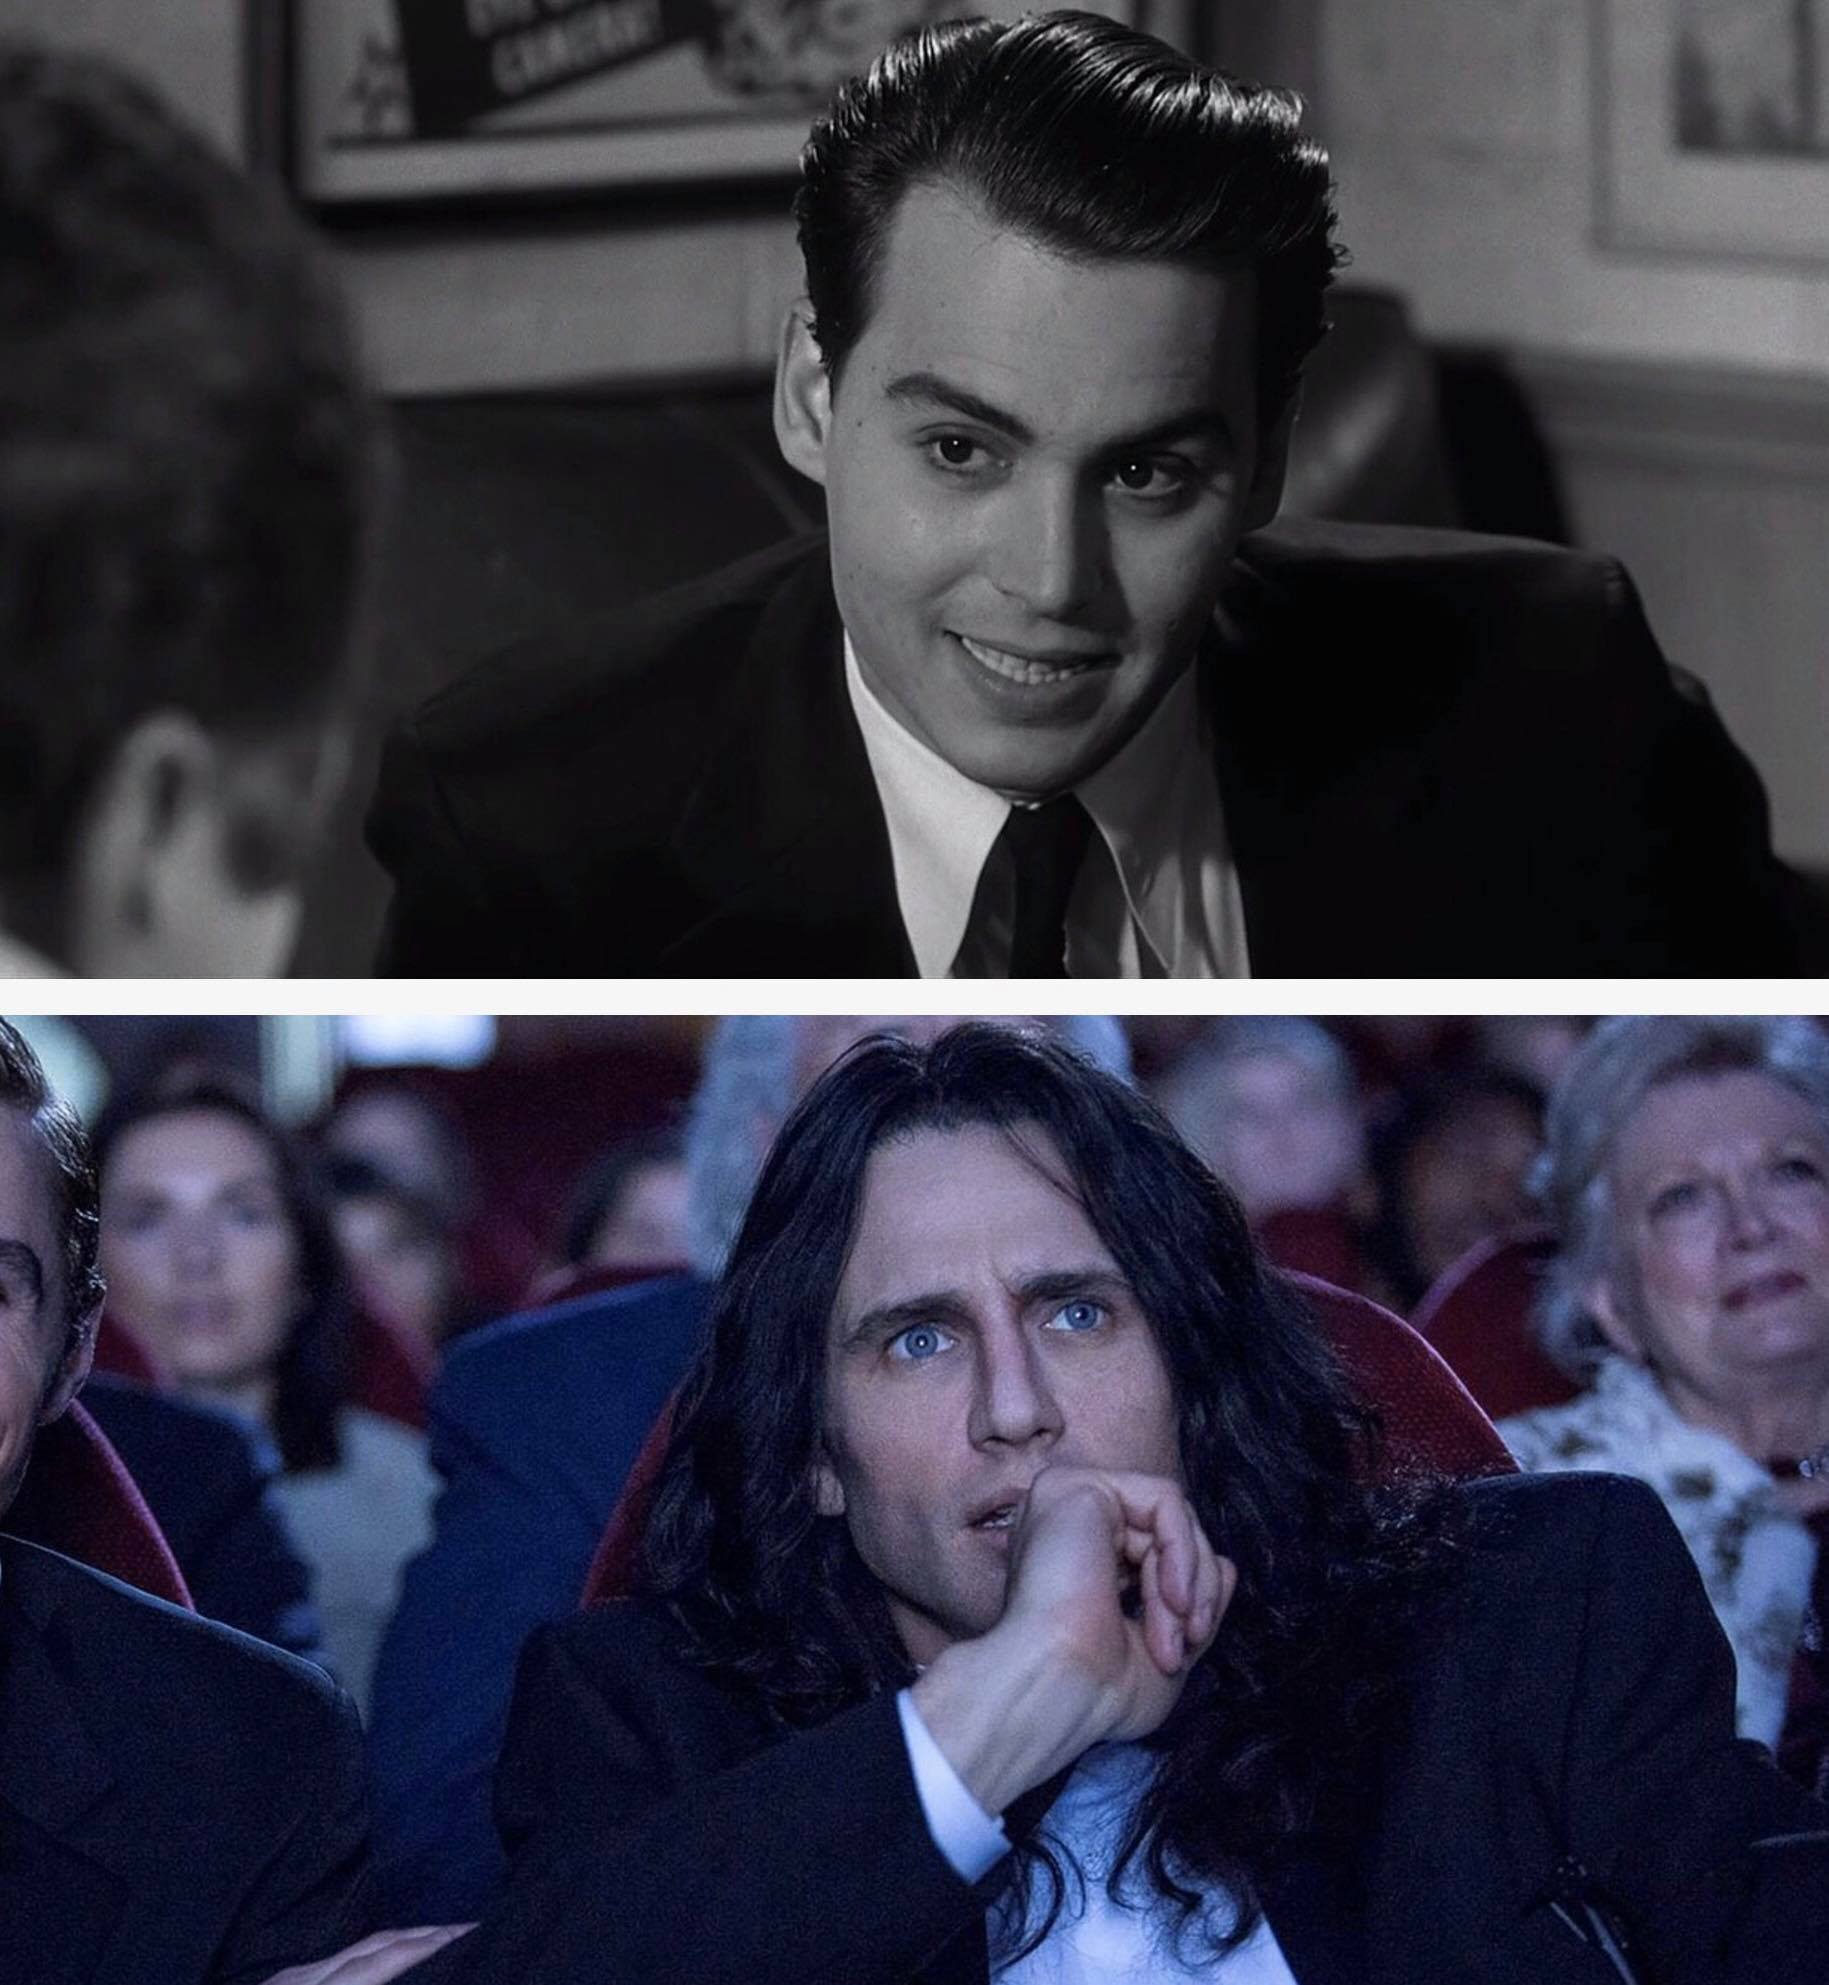 Ed Wood (Tim Burton, 1994) The Disaster Artist (James Franco, 2017) "Here's to the ones who dream Foolish as they may seem"